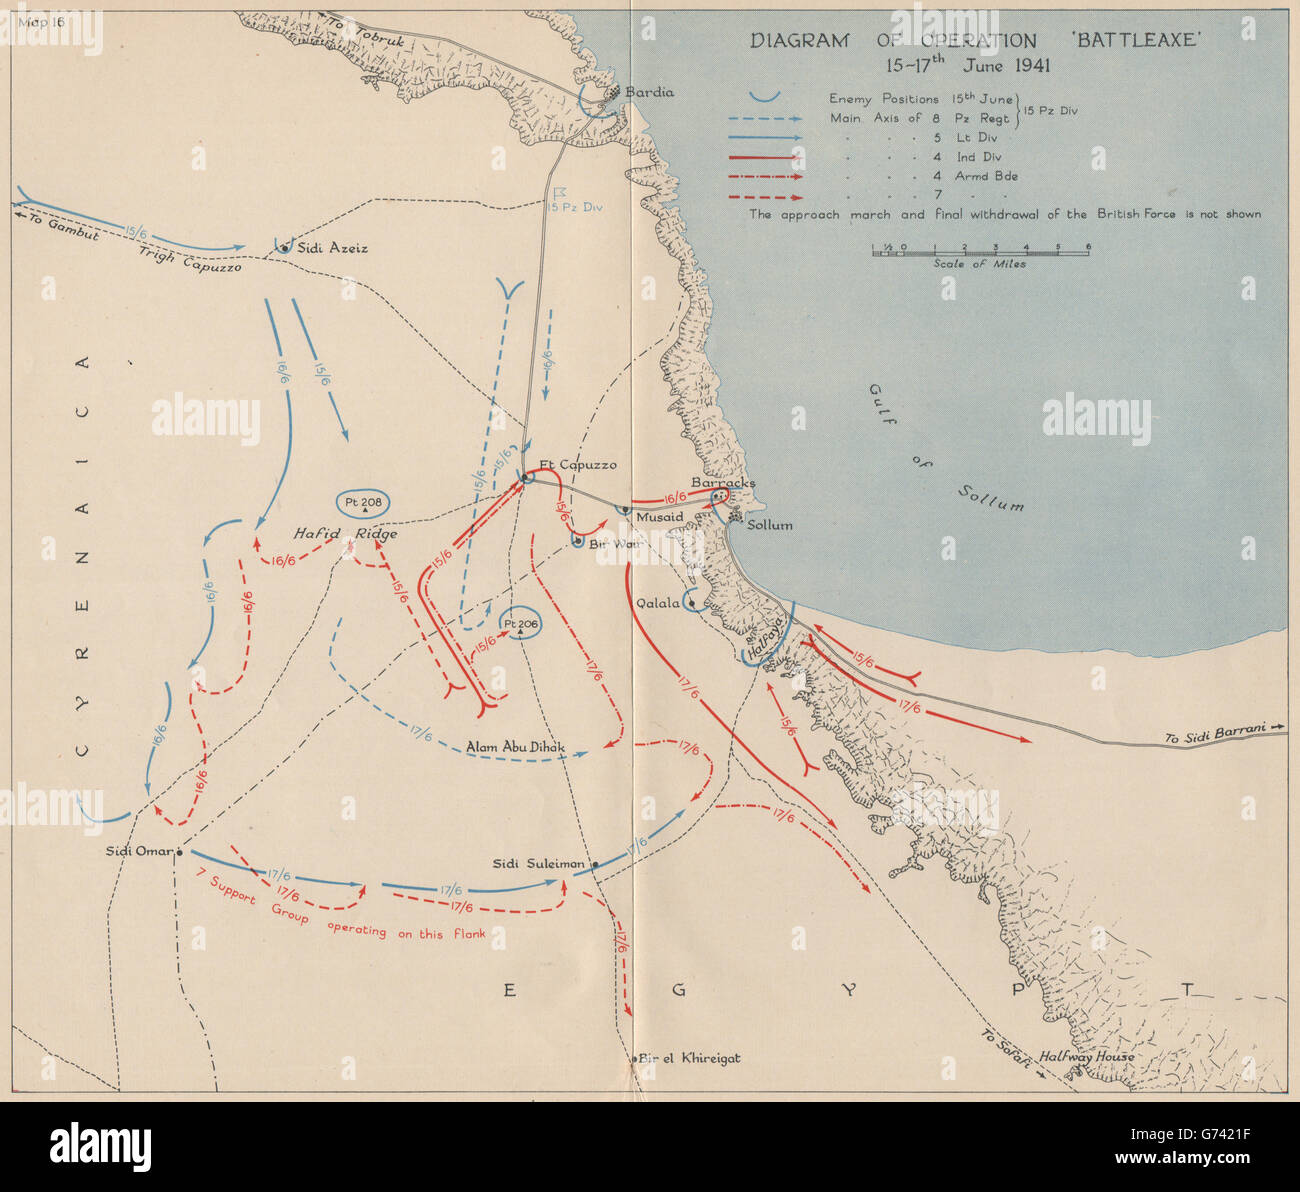 WW2 NORTH AFRICAN CAMPAIGN. Operation Battleaxe 15-17 June ...